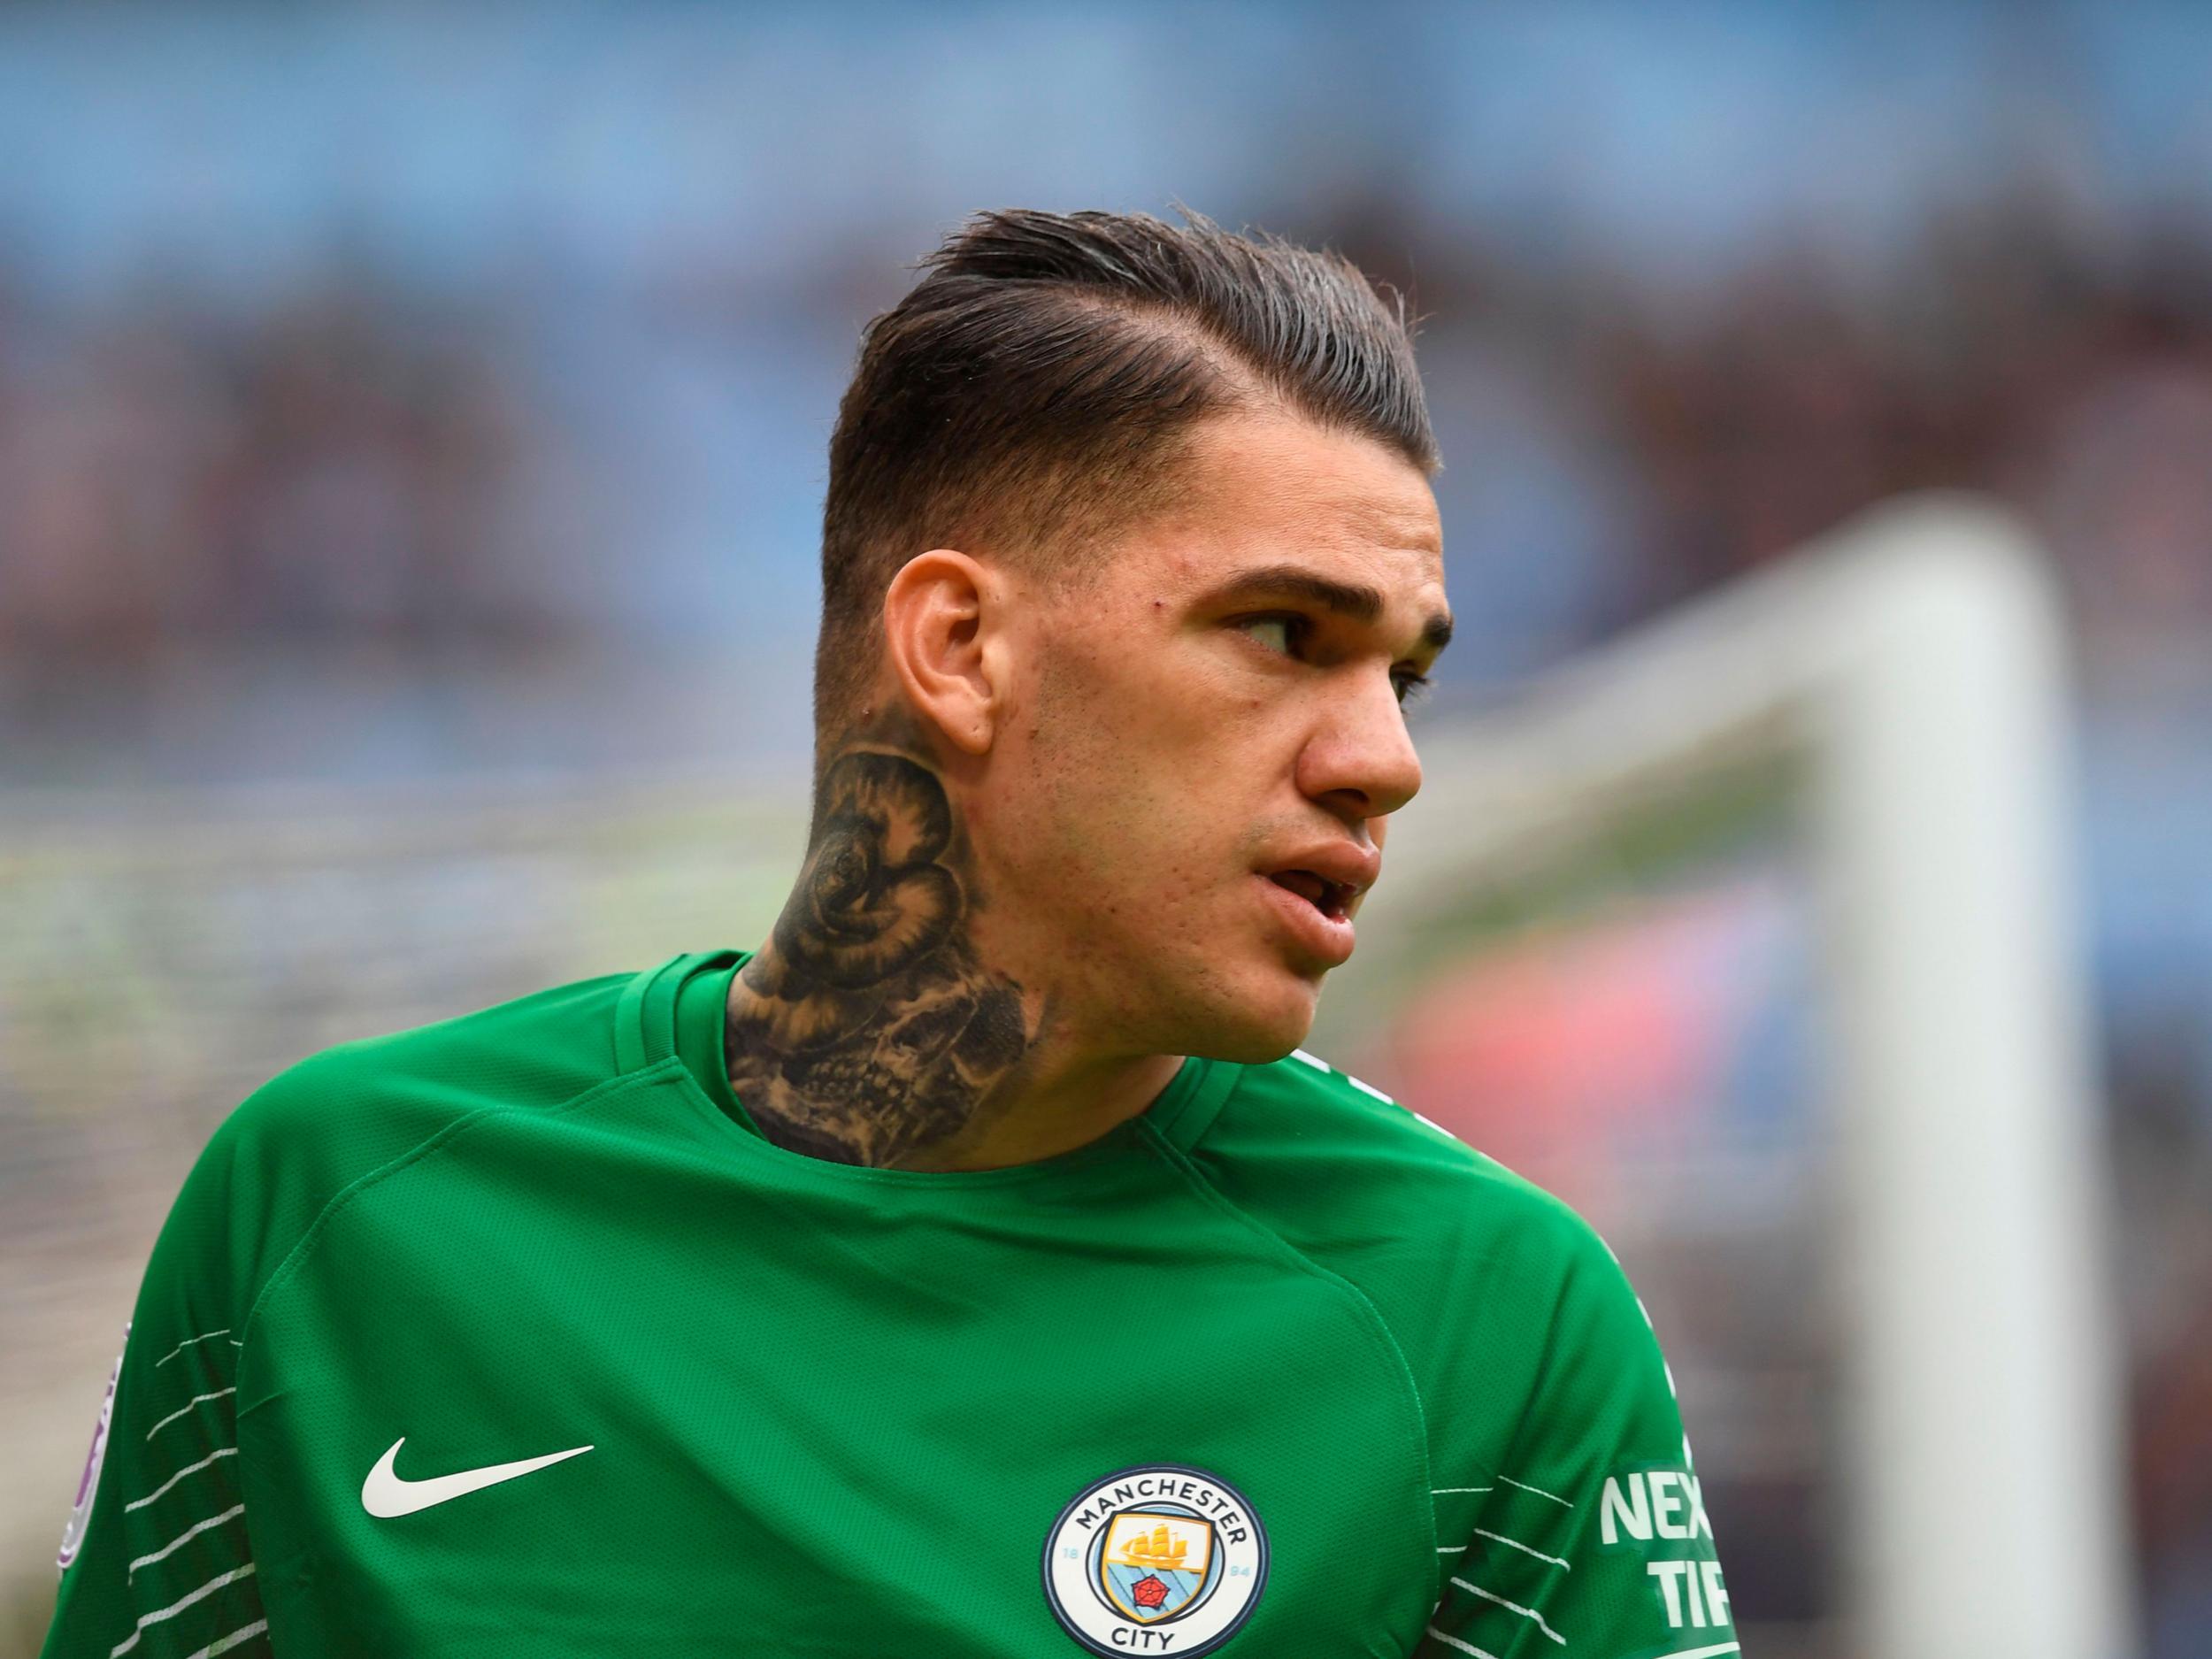  Ederson, the goalkeeper for Manchester City, looks on during a match.